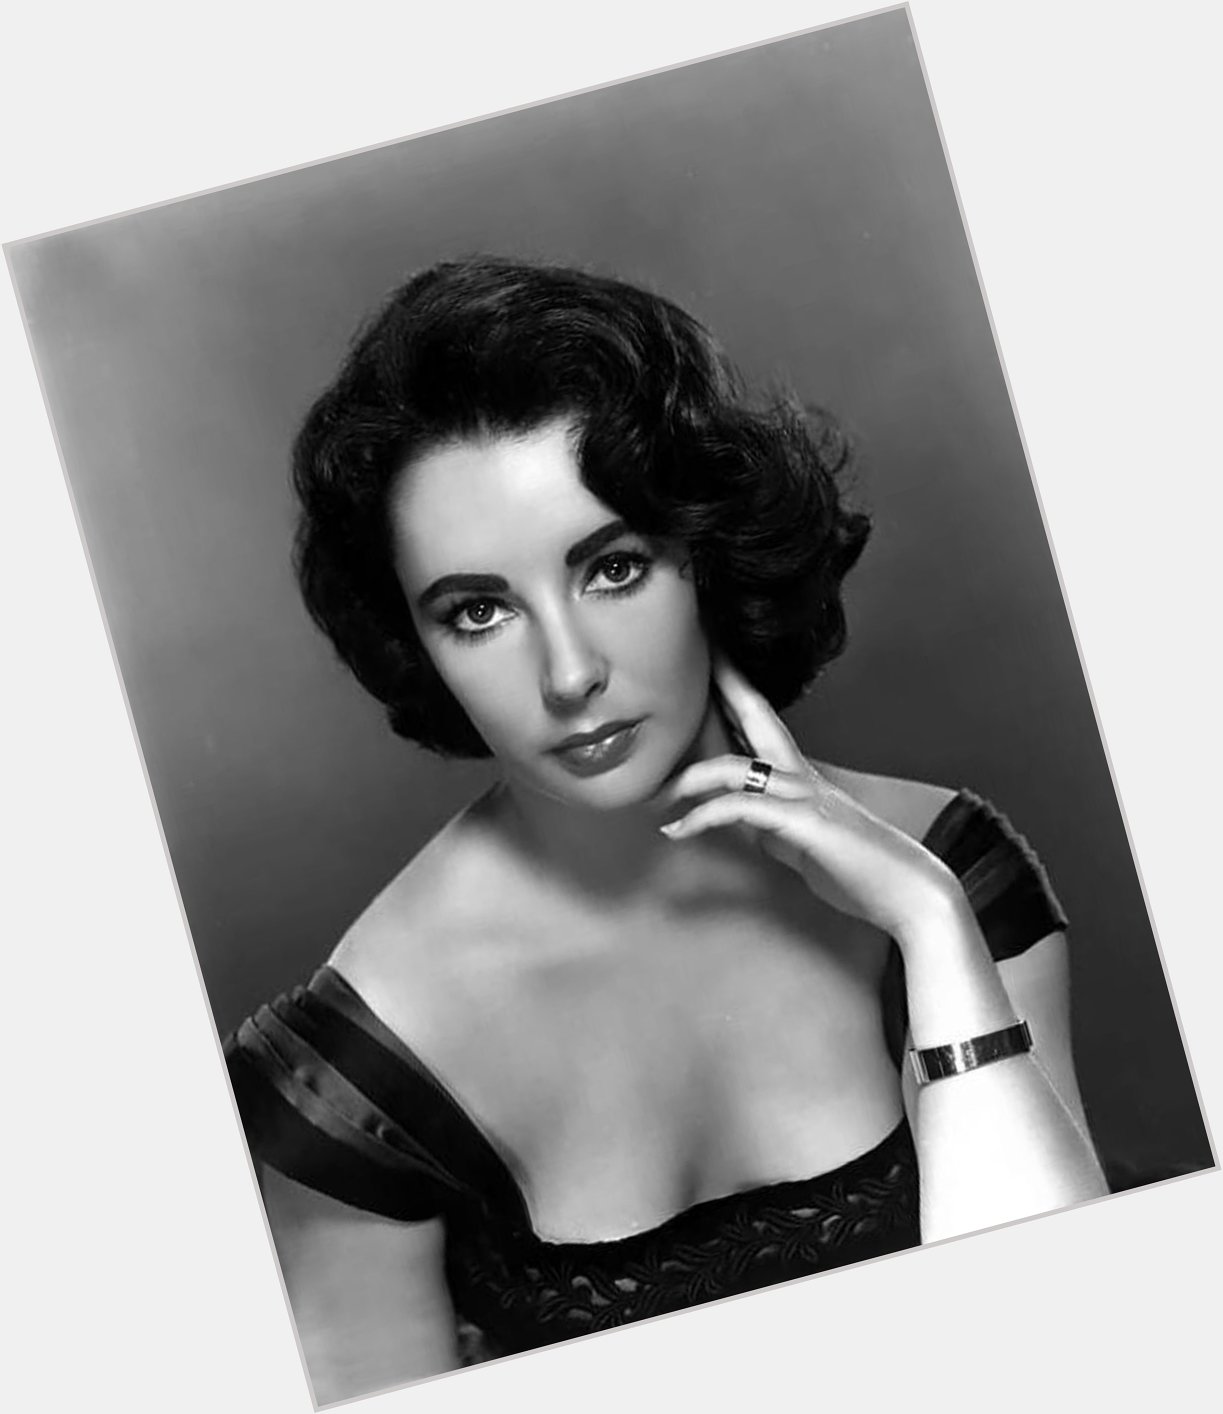 Happy Birthday to the OG movie star queen Elizabeth Taylor.... the greatest actress ever 